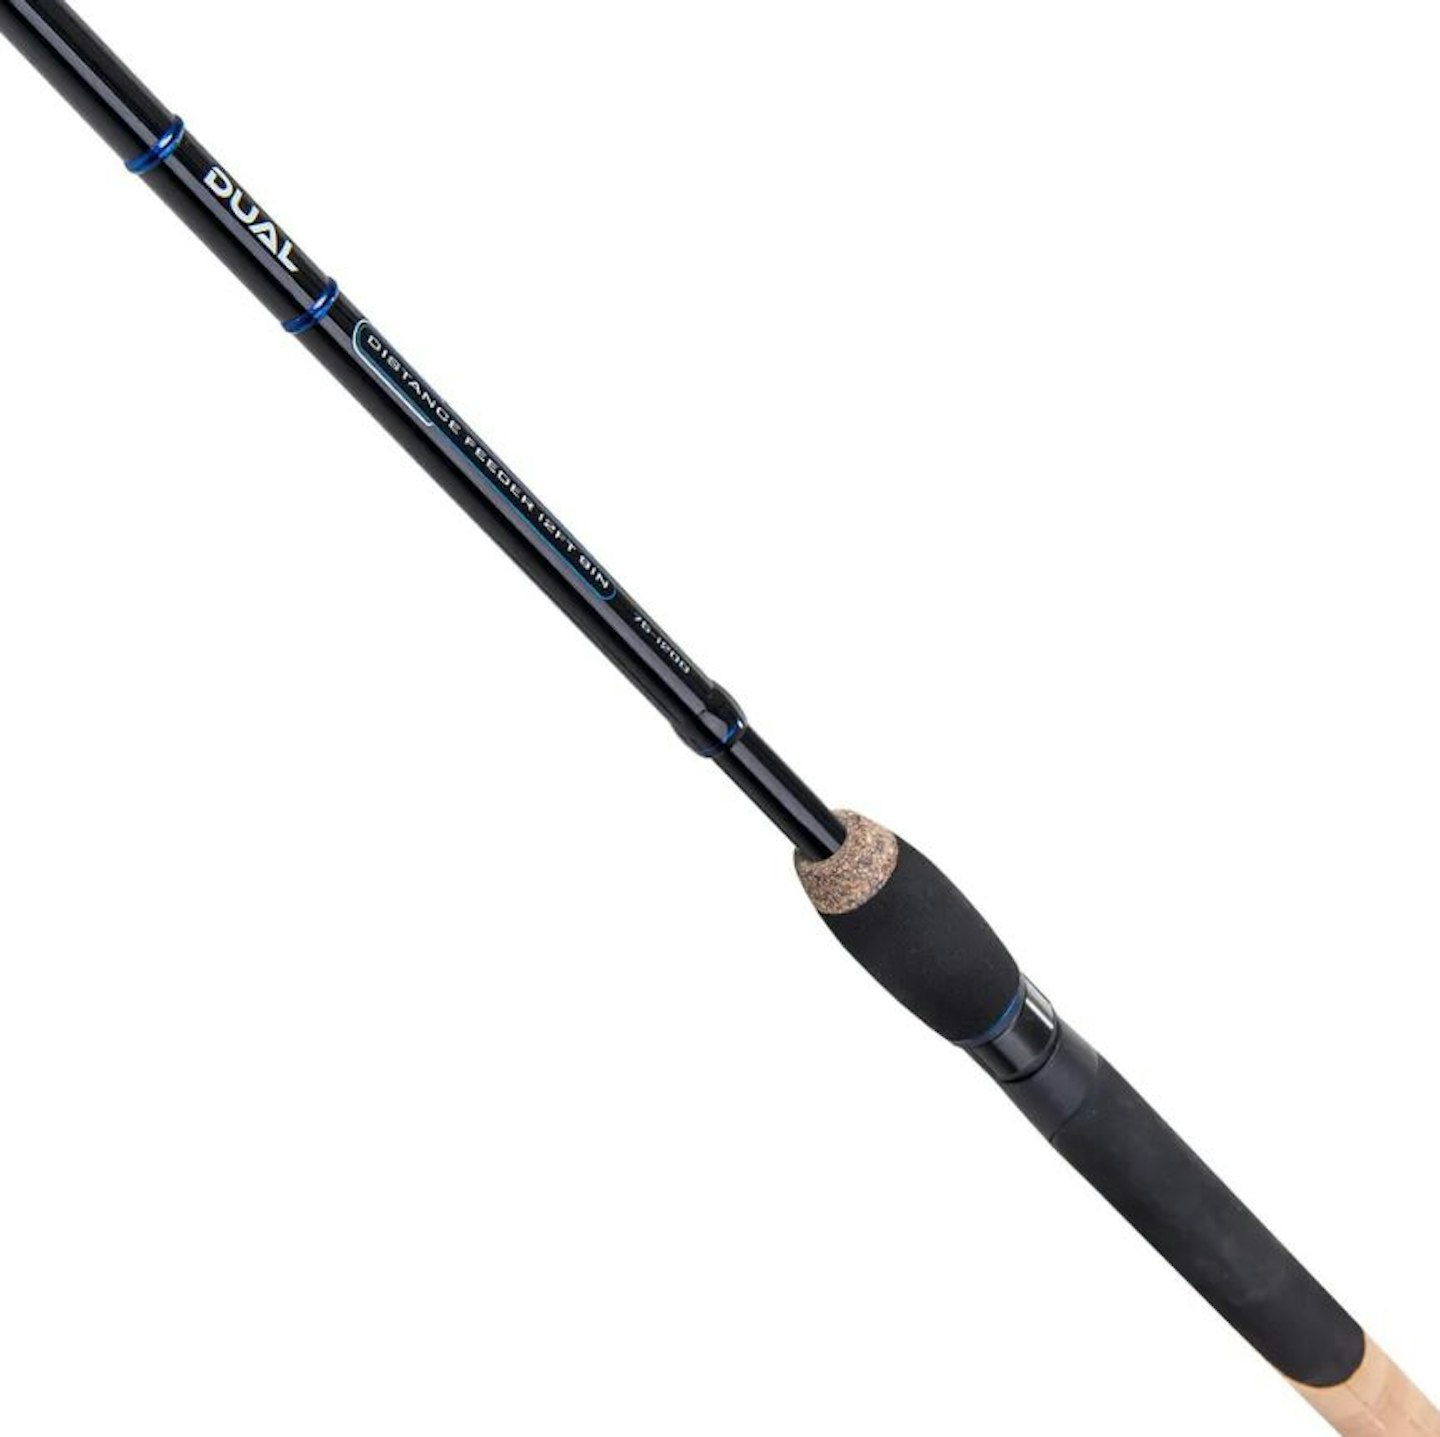 Middy 5G 10ft Method Rod review